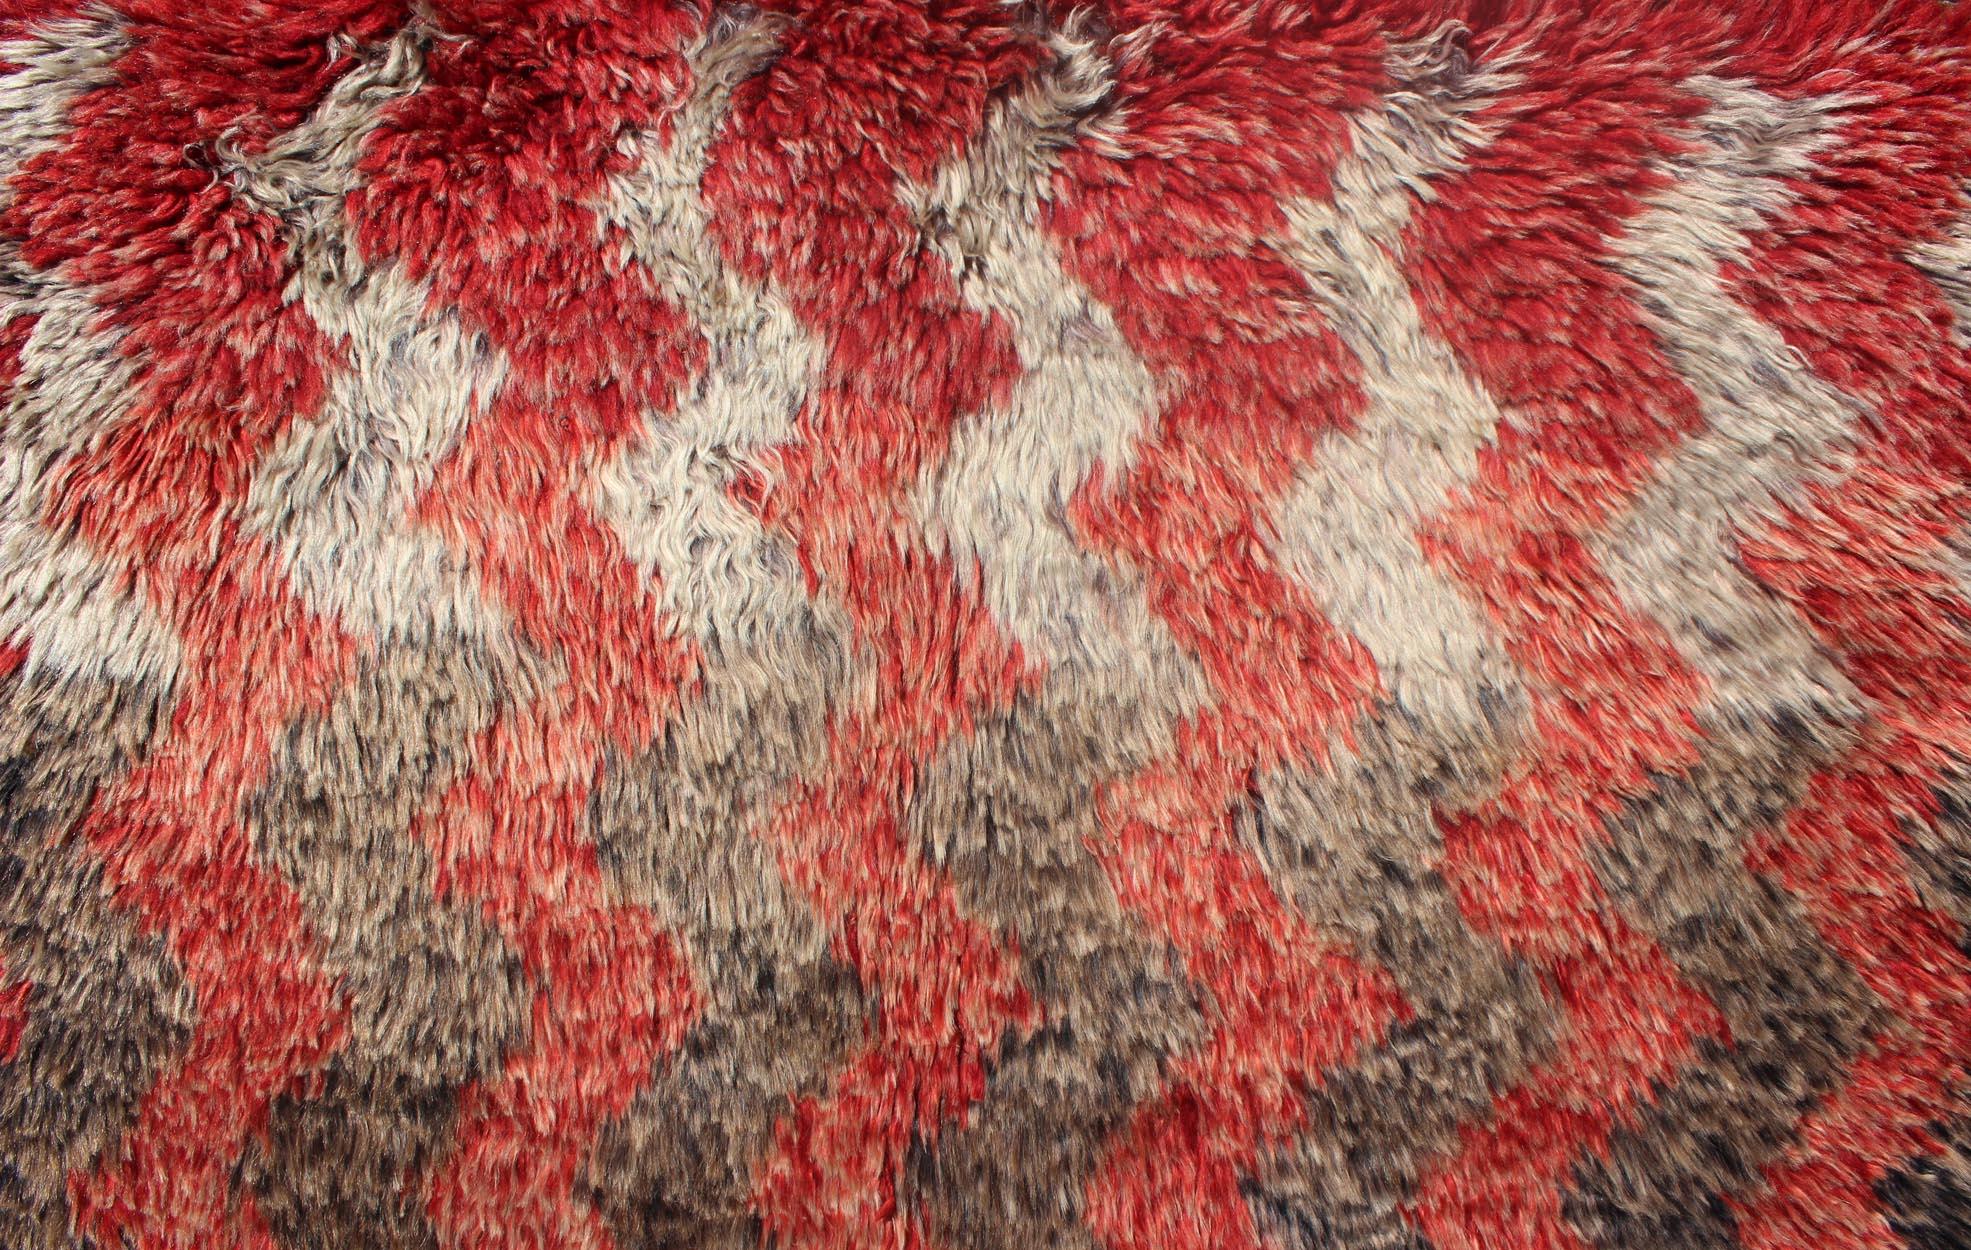 20th Century Turkish Tulu Carpet with Zig-Zag Stripe Pattern in Gray, Charcoal and Red